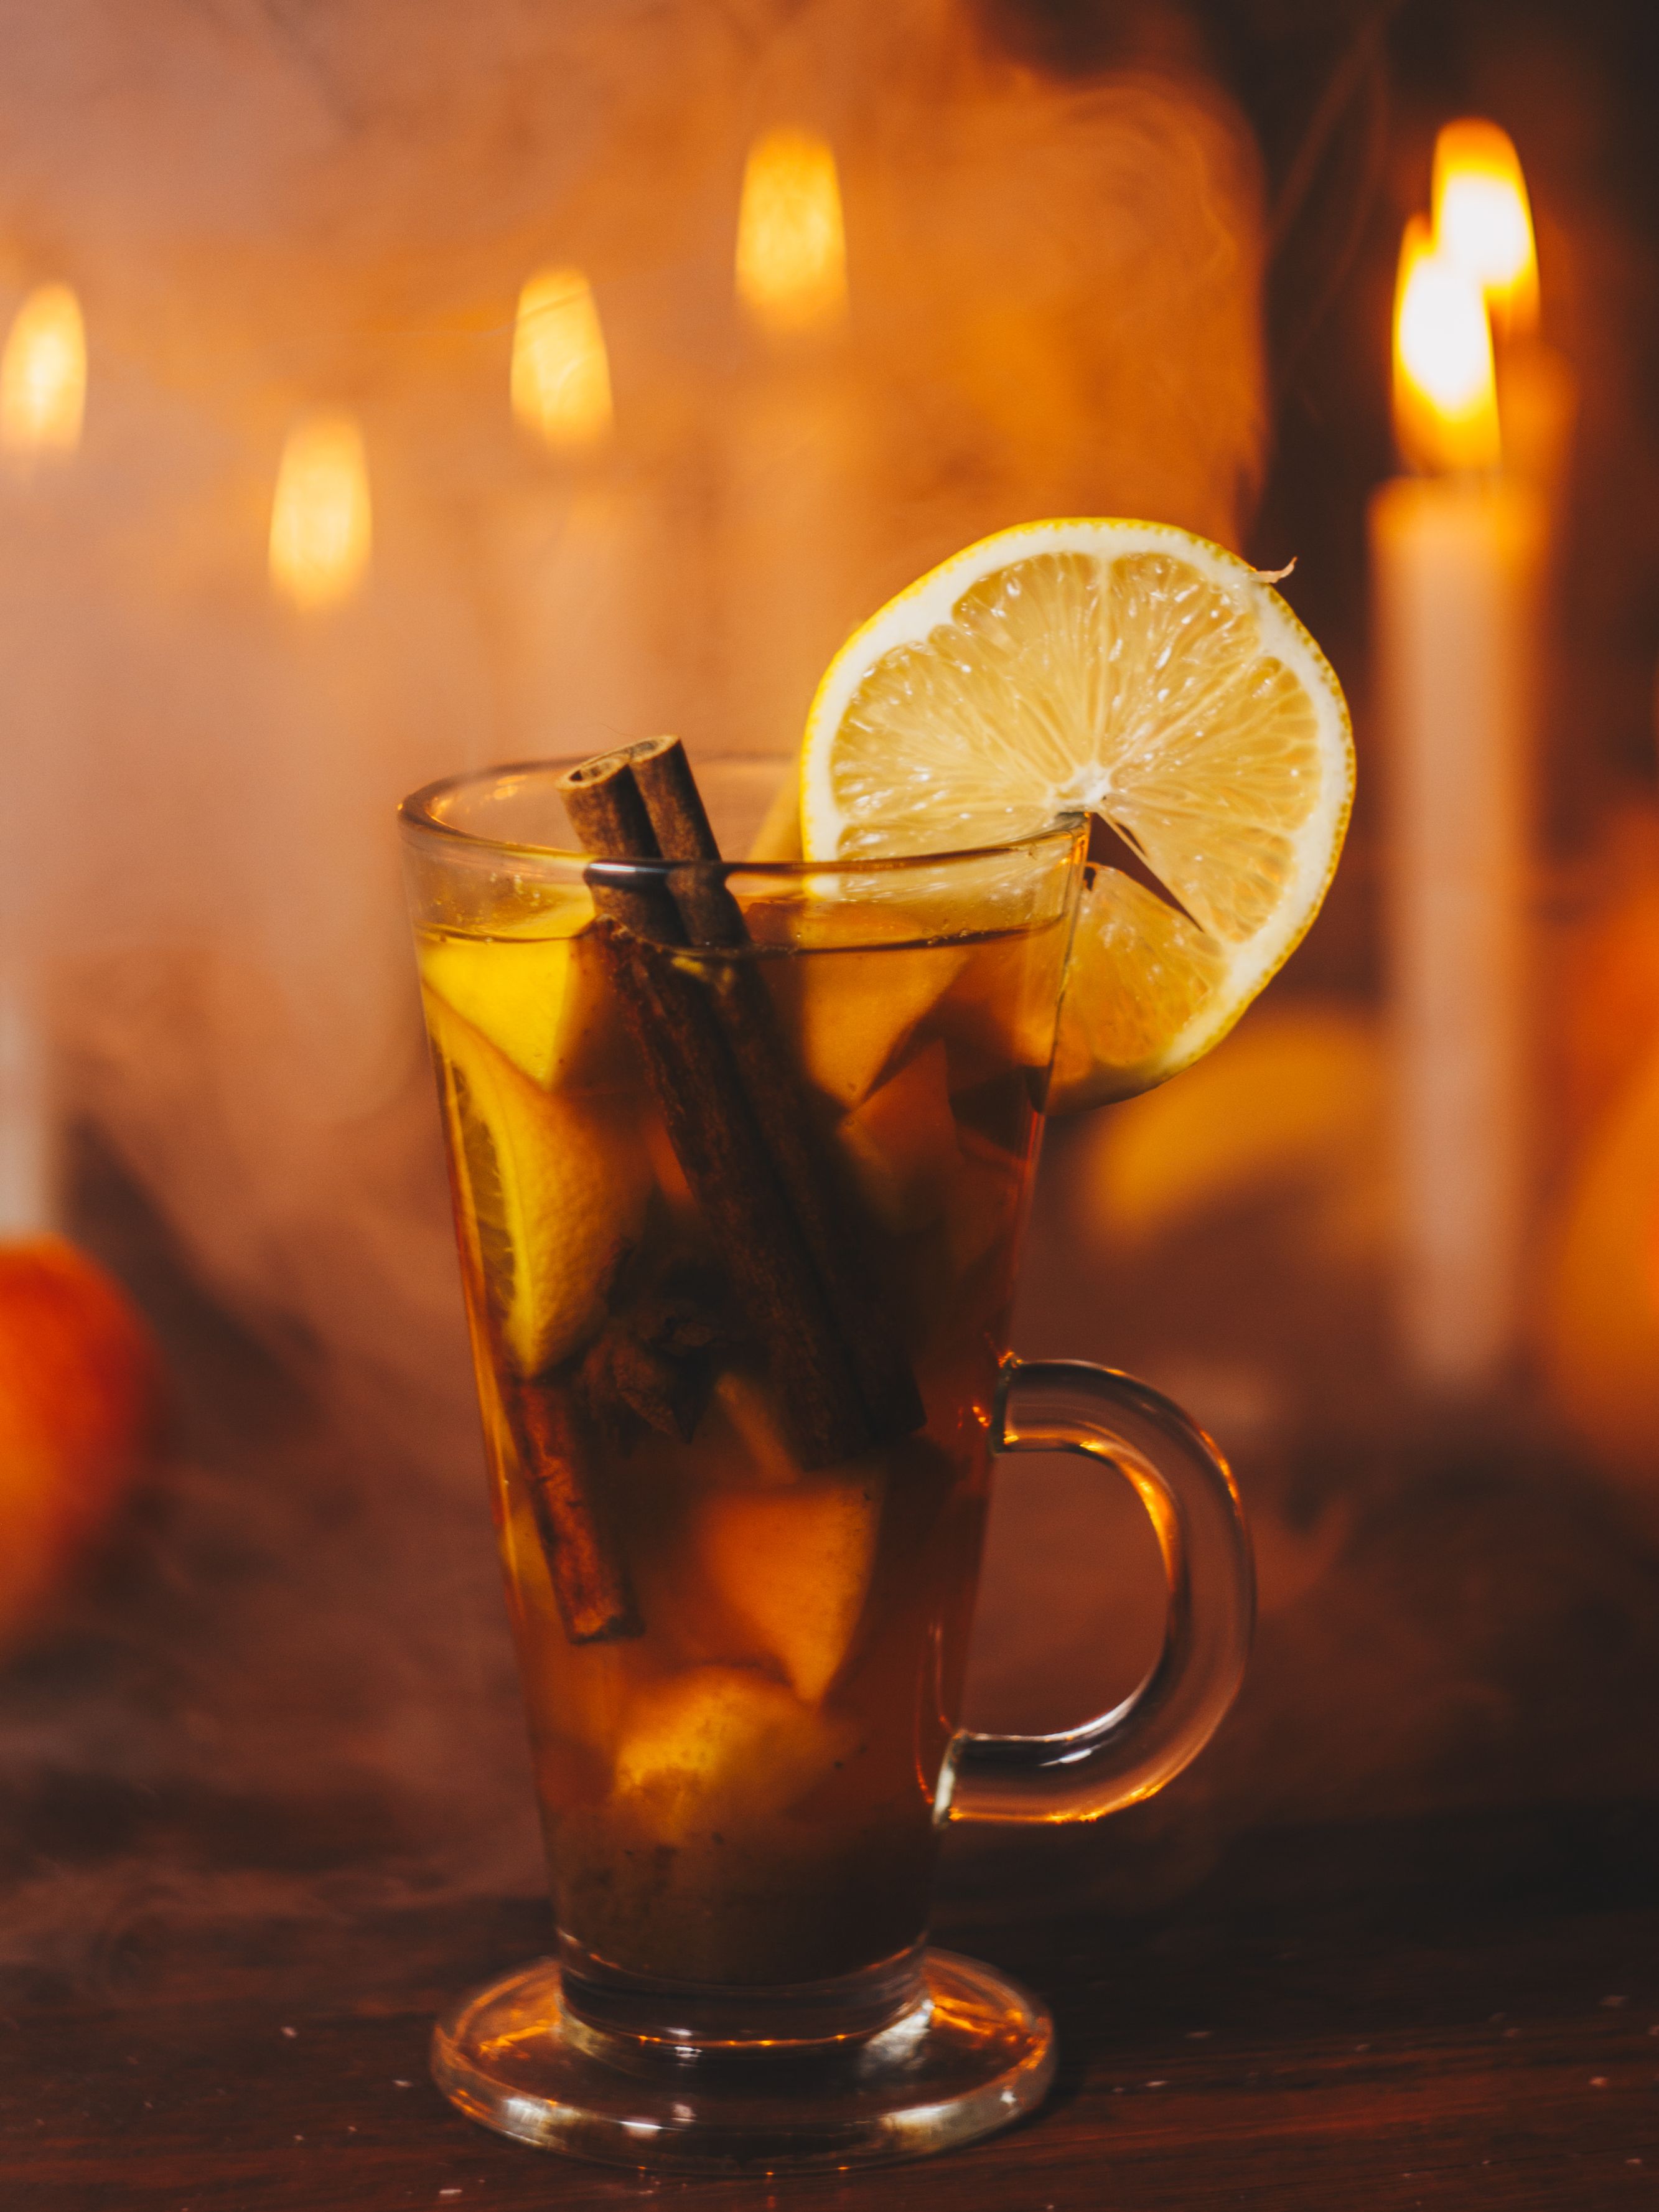 history of the English Christmas punch